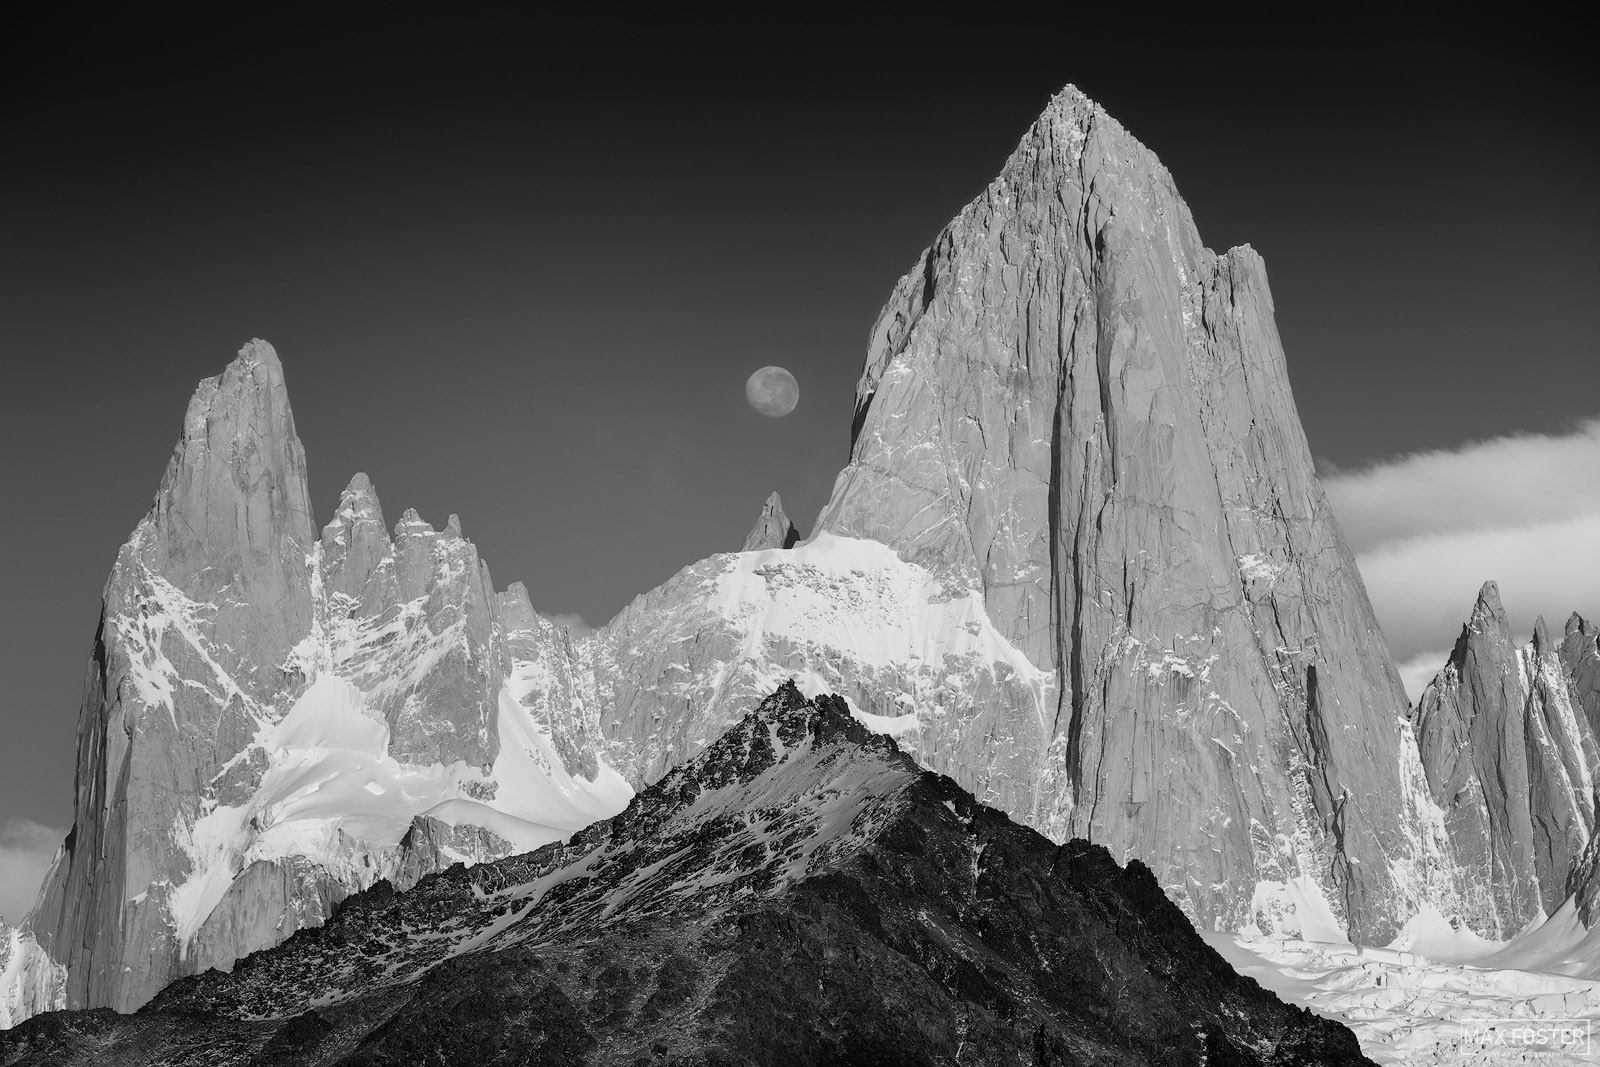 Transform your living space with Chromatic Bliss, Max Foster's limited edition photographic print of Mount Fitz Roy in Los Glaciares...